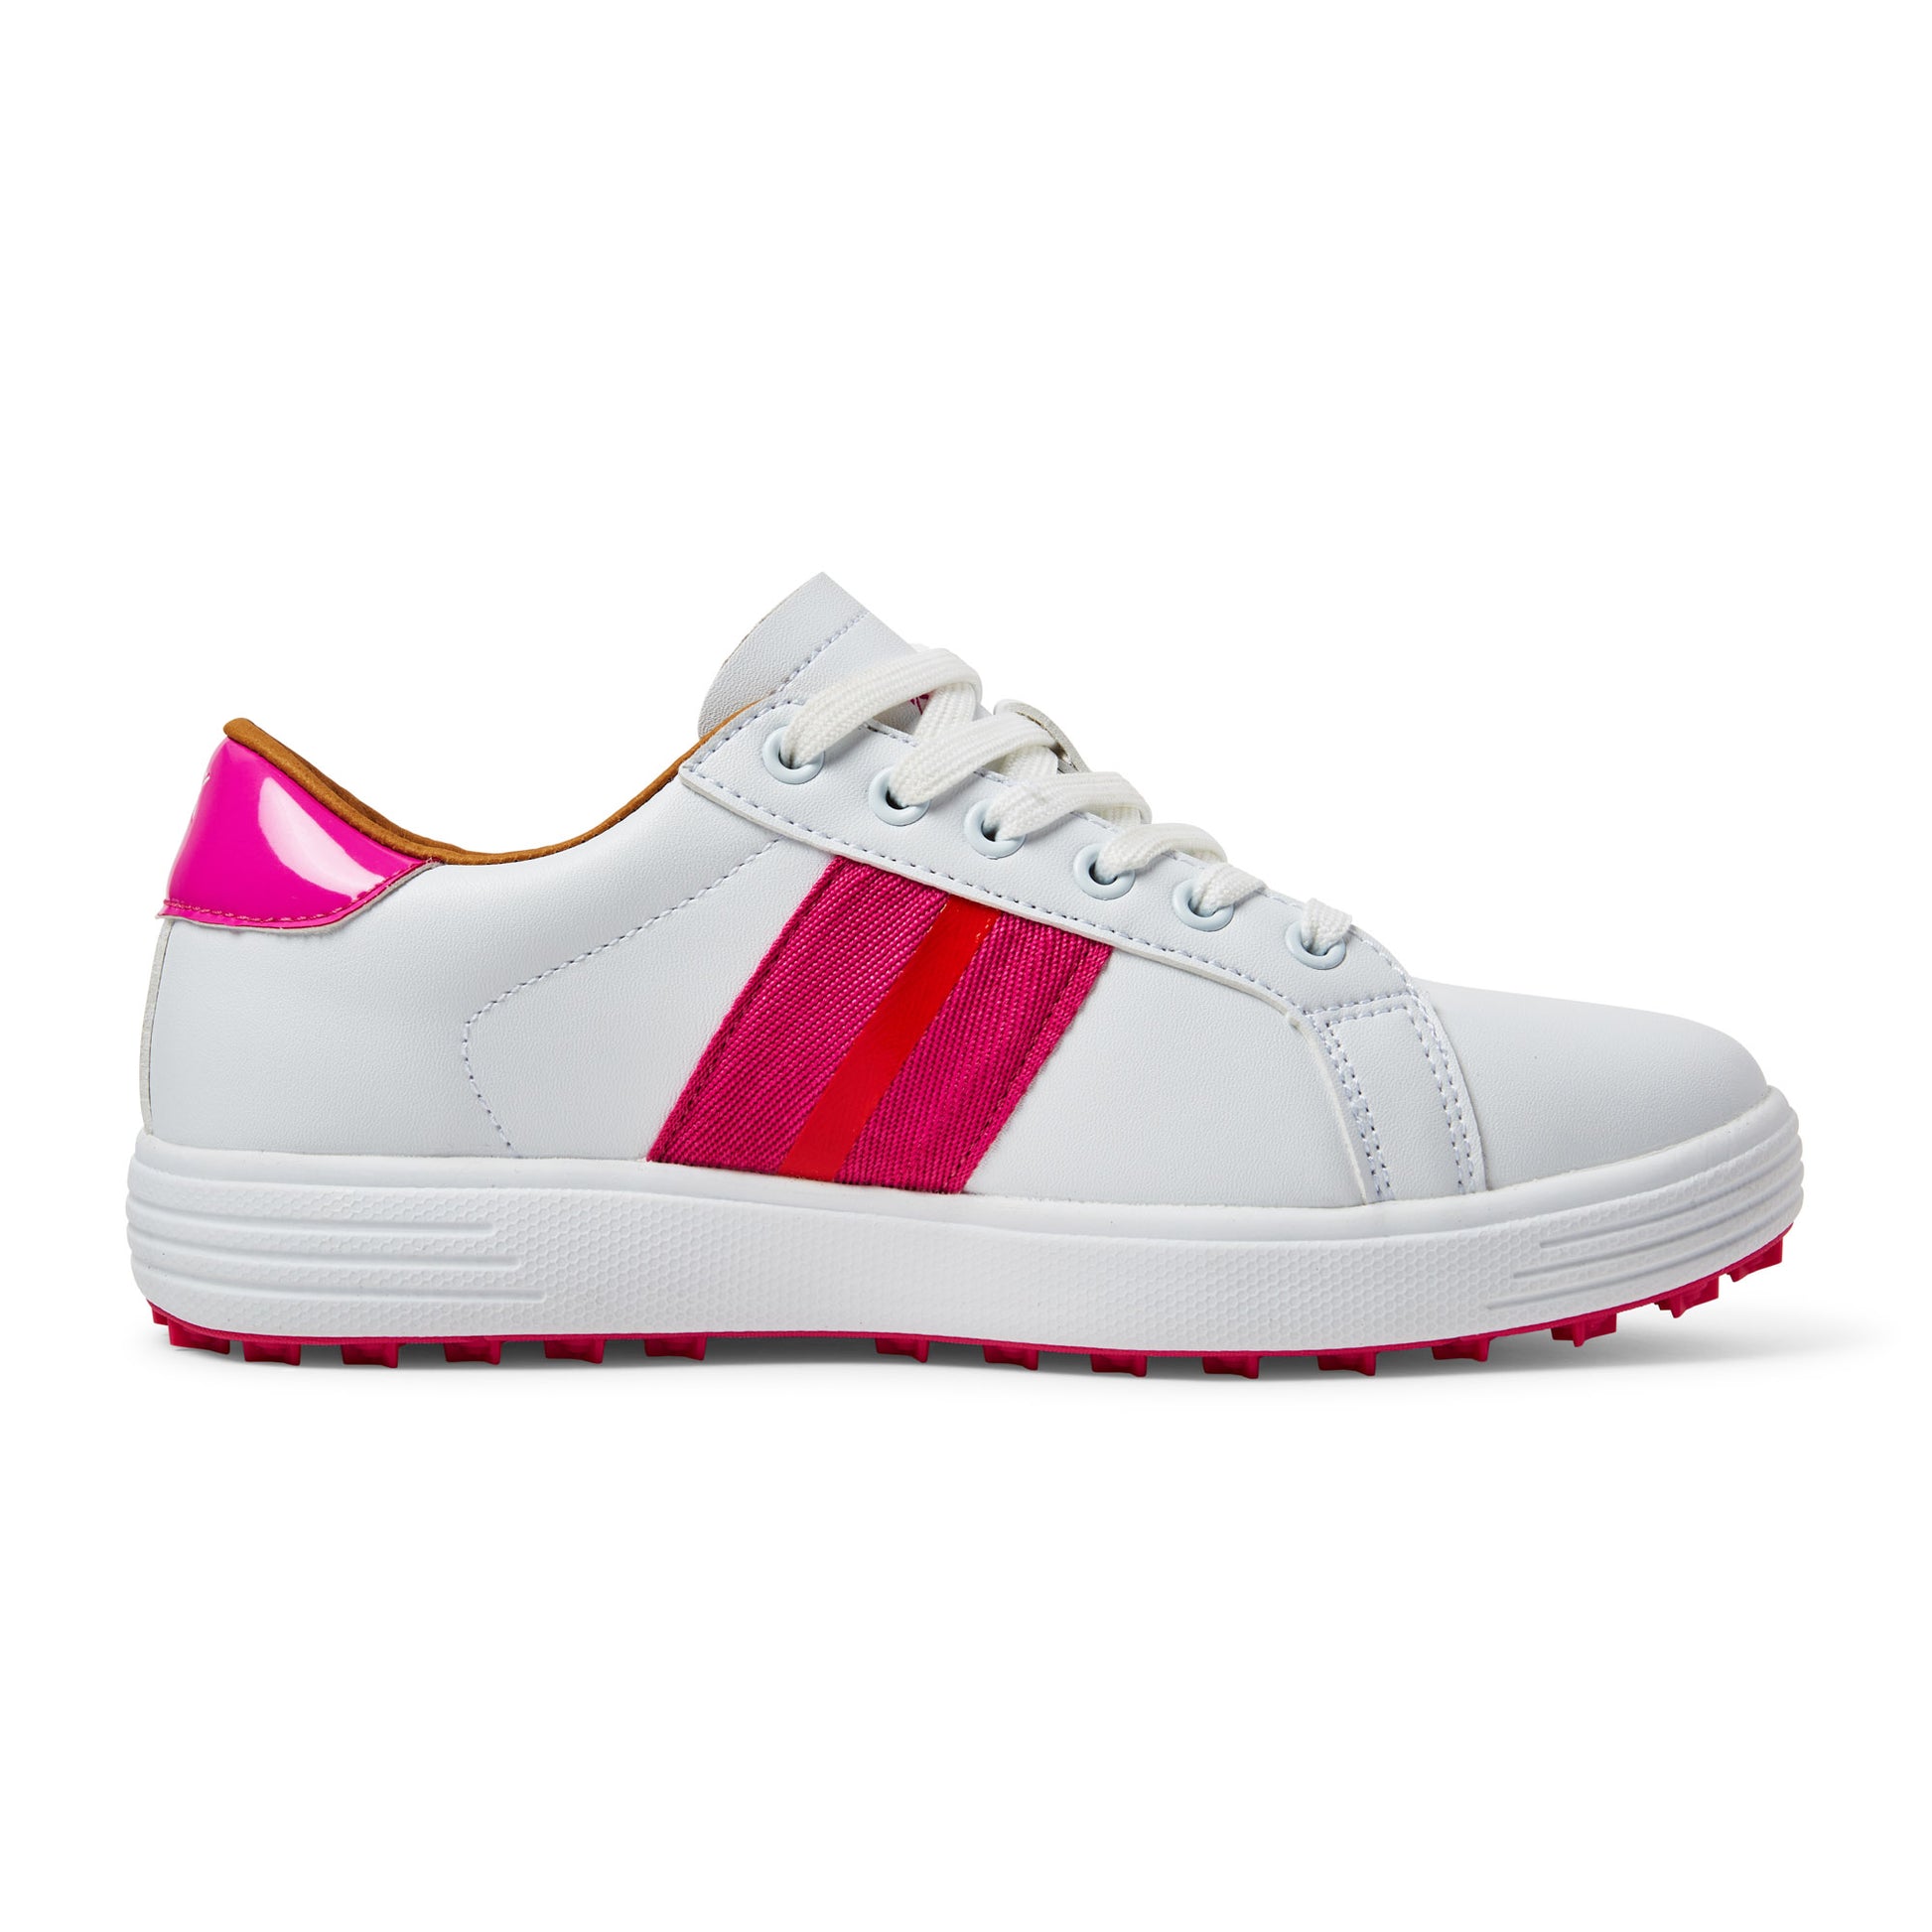 Swing Out Sister Ladies Lush Pink and Mandarin Sole Sister Golf Shoes 